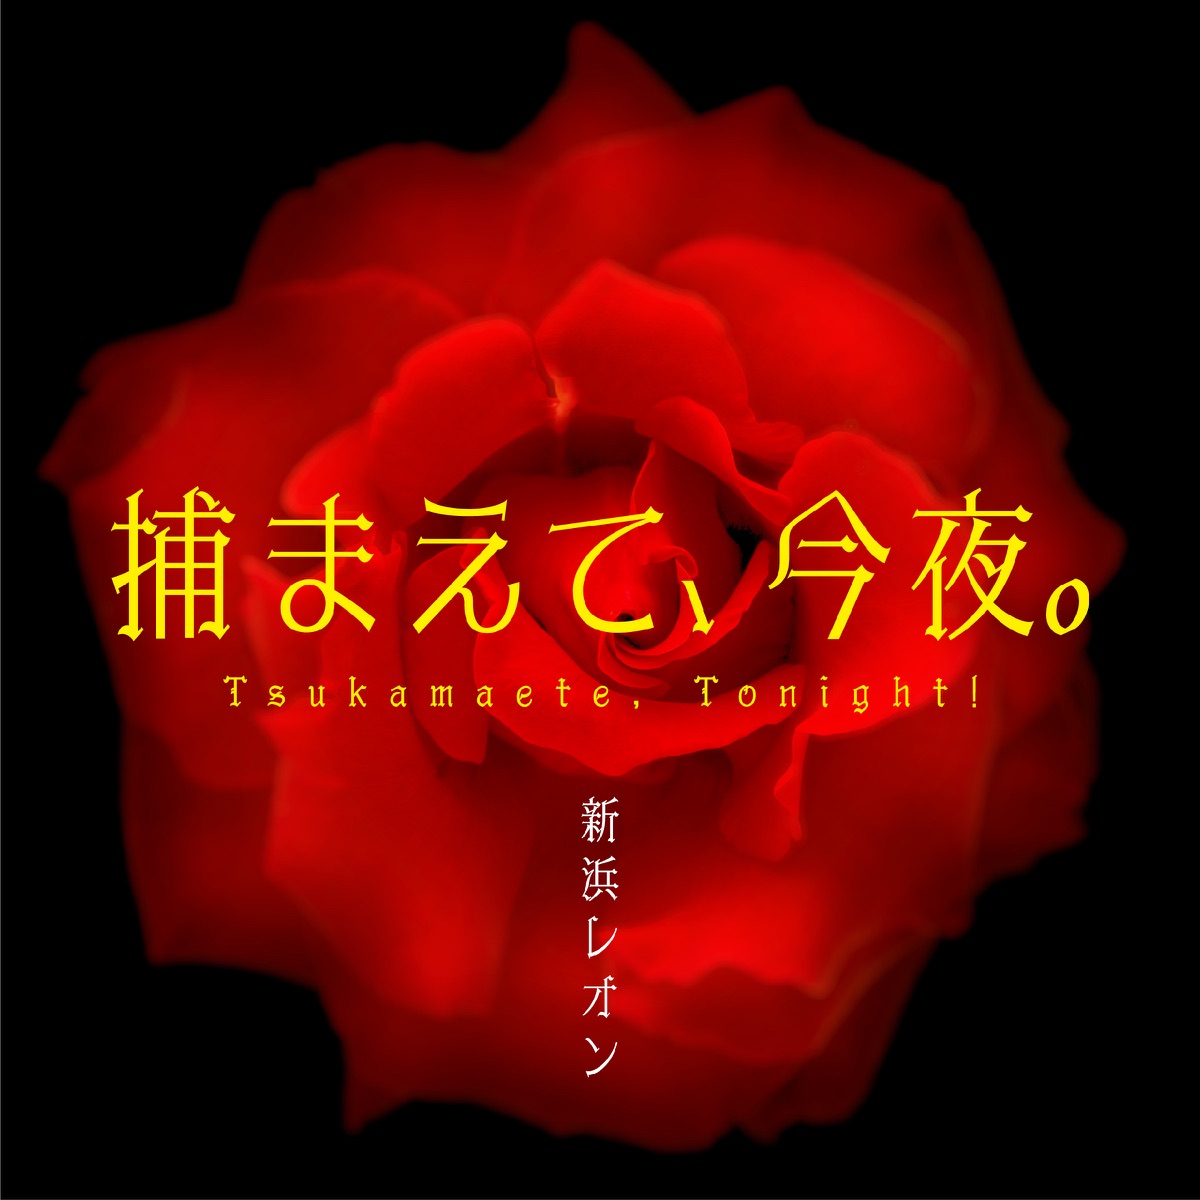 Cover art for『Leon Niihama - 捕まえて、今夜。』from the release『Tsukamaete, Tonight!